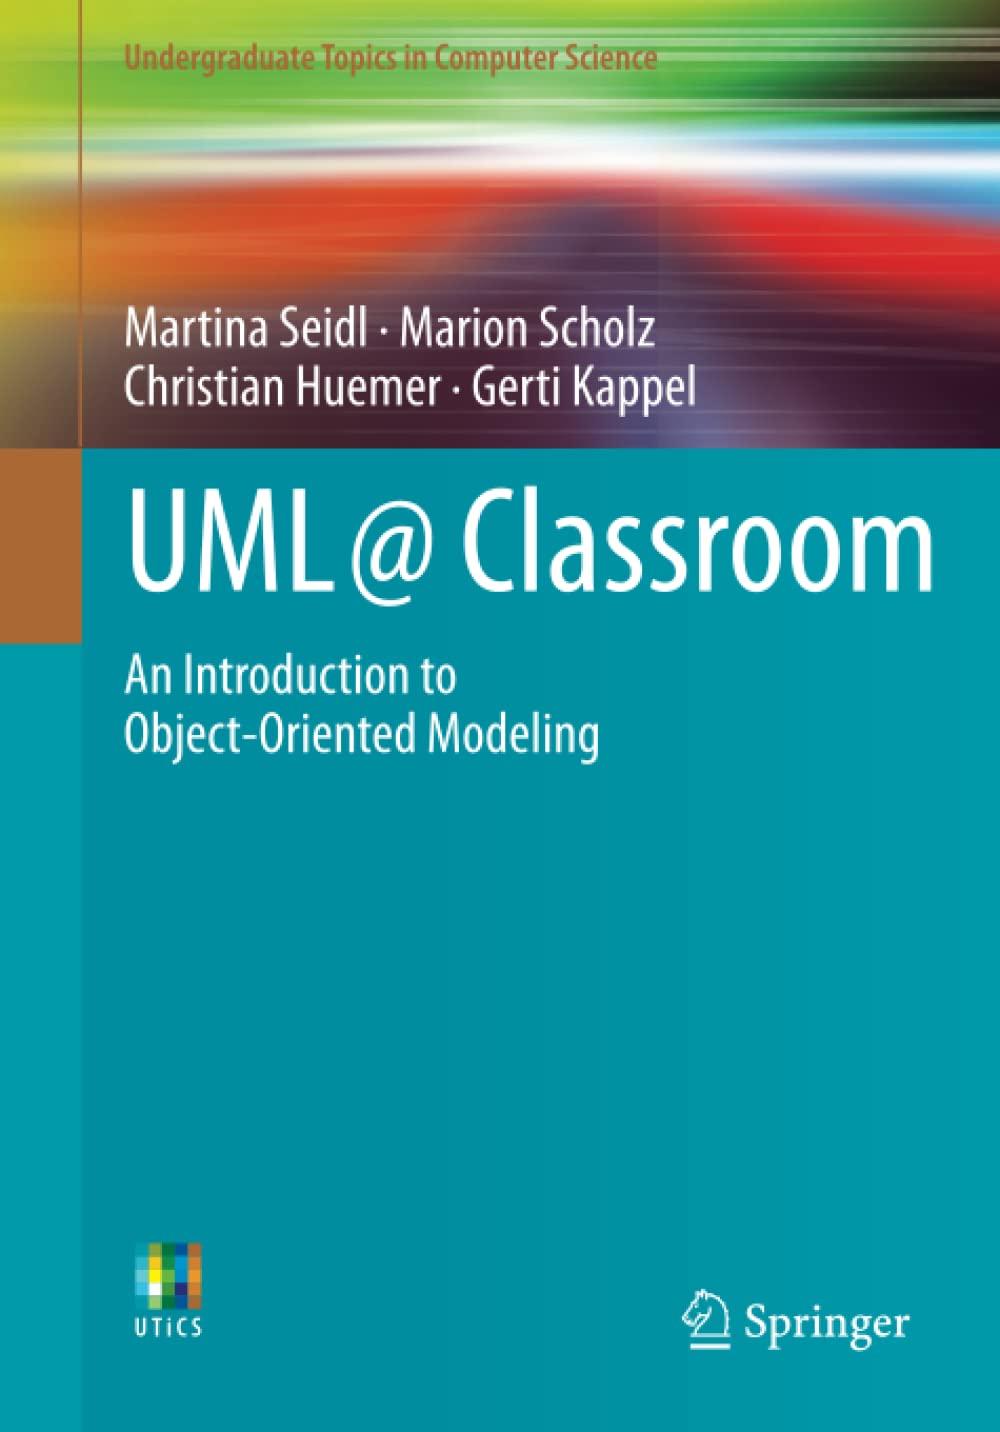 uml @ classroom an introduction to object oriented modeling 2015 edition martina seidl, marion scholz,